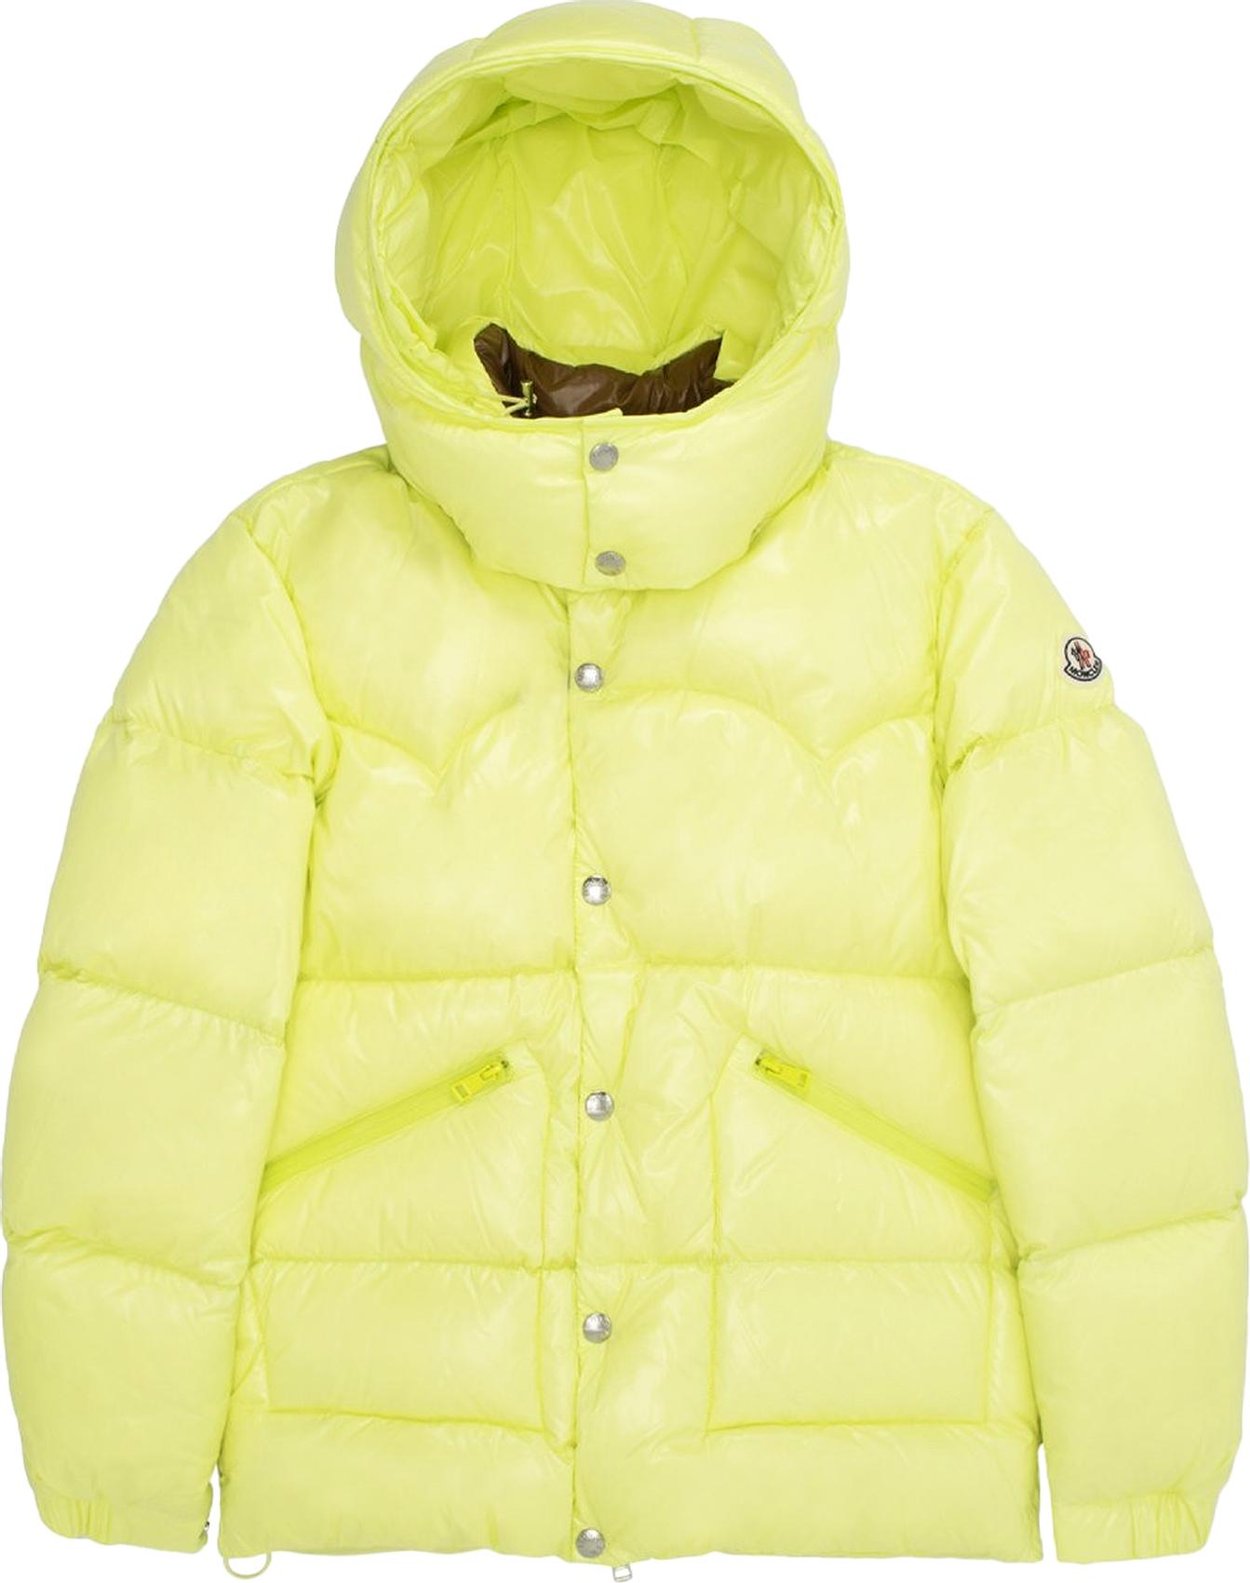 Buy Moncler Coutard Shiny Puffer Jacket 'Yellow' - 1A000 41 68950 112 ...